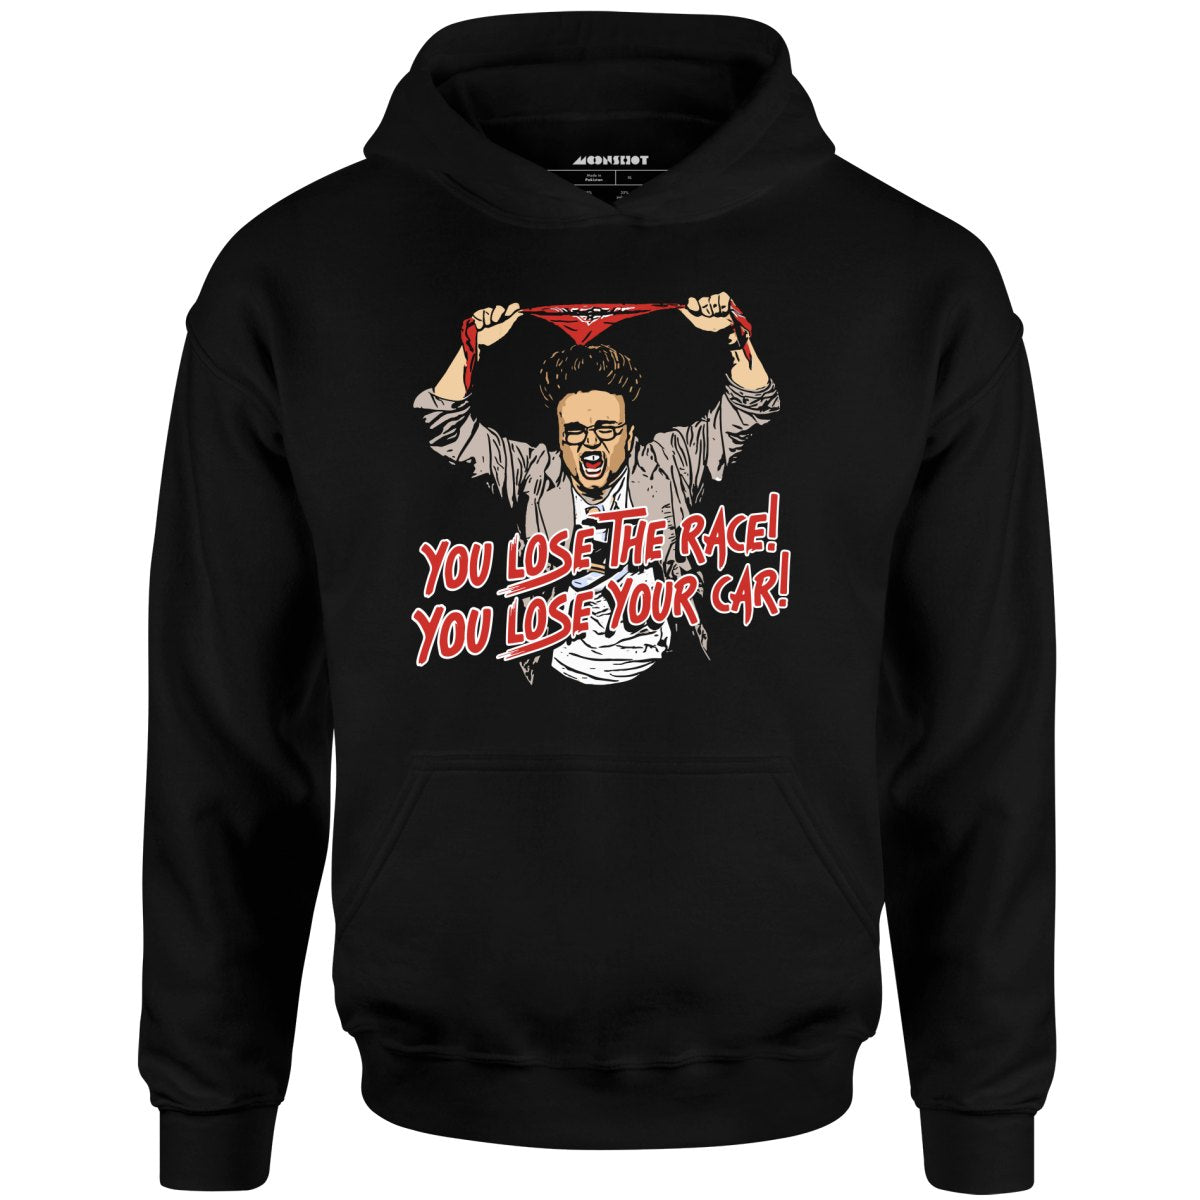 You Lose The Race You Lose Your Car - Unisex Hoodie